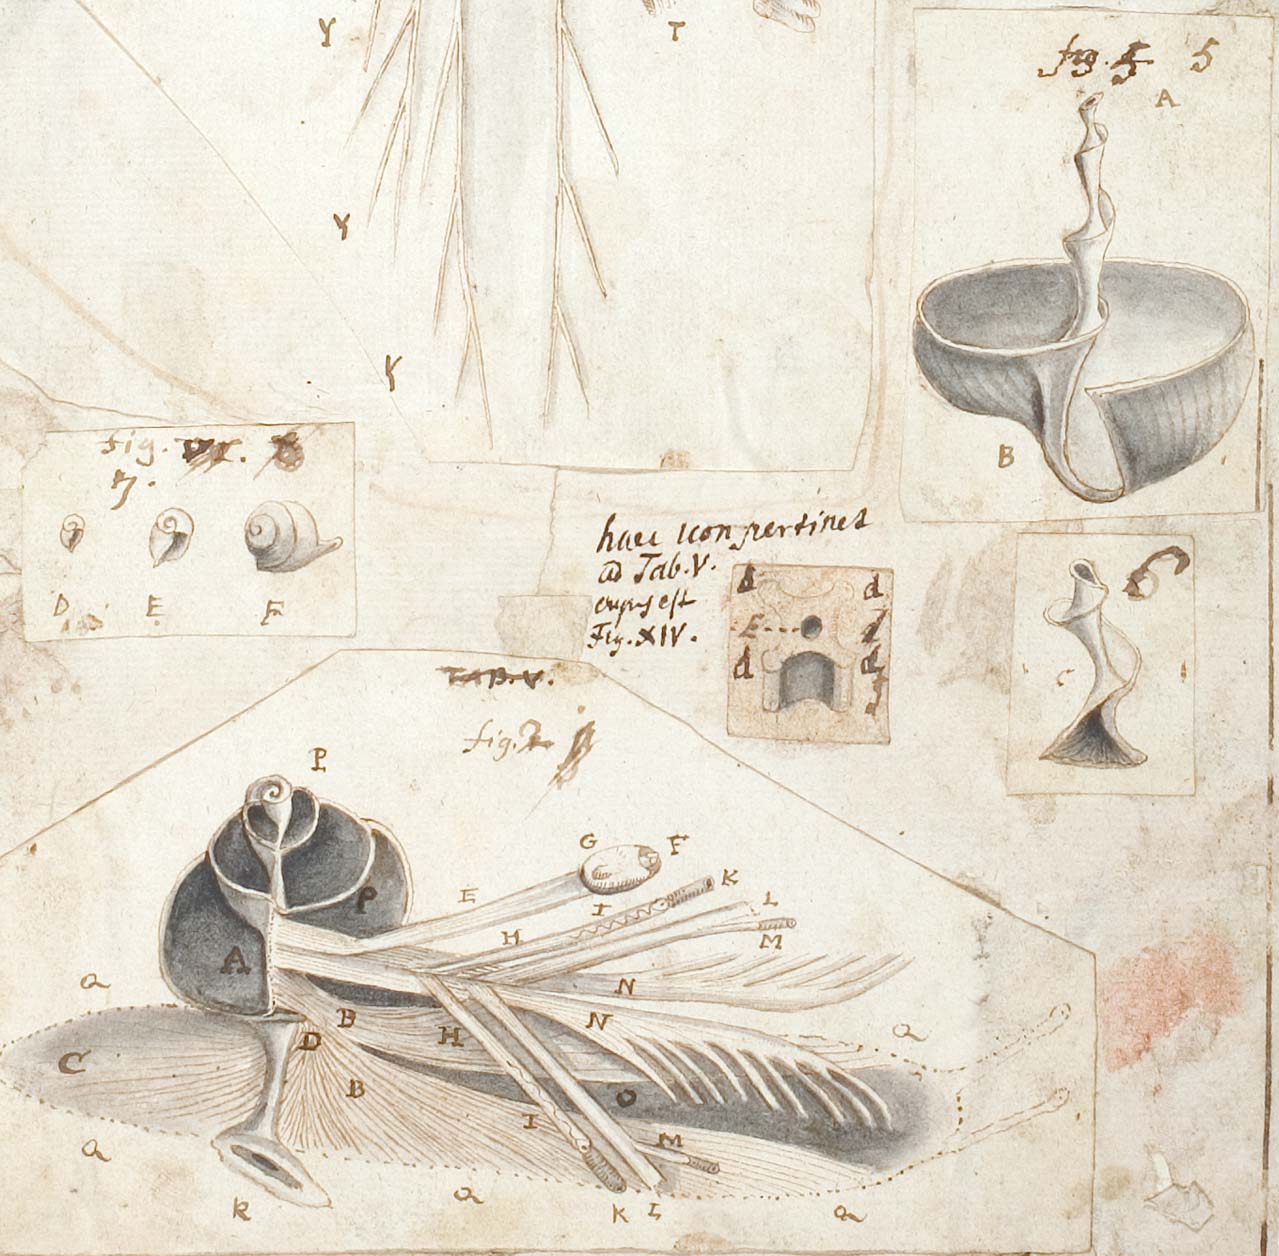 Johannes Swammerdam, The anatomy of a snail in Icones operis Bibliae naturae c. 1678. Drawing, detail from fol. 7r. BPL 126 B. Leiden University Library